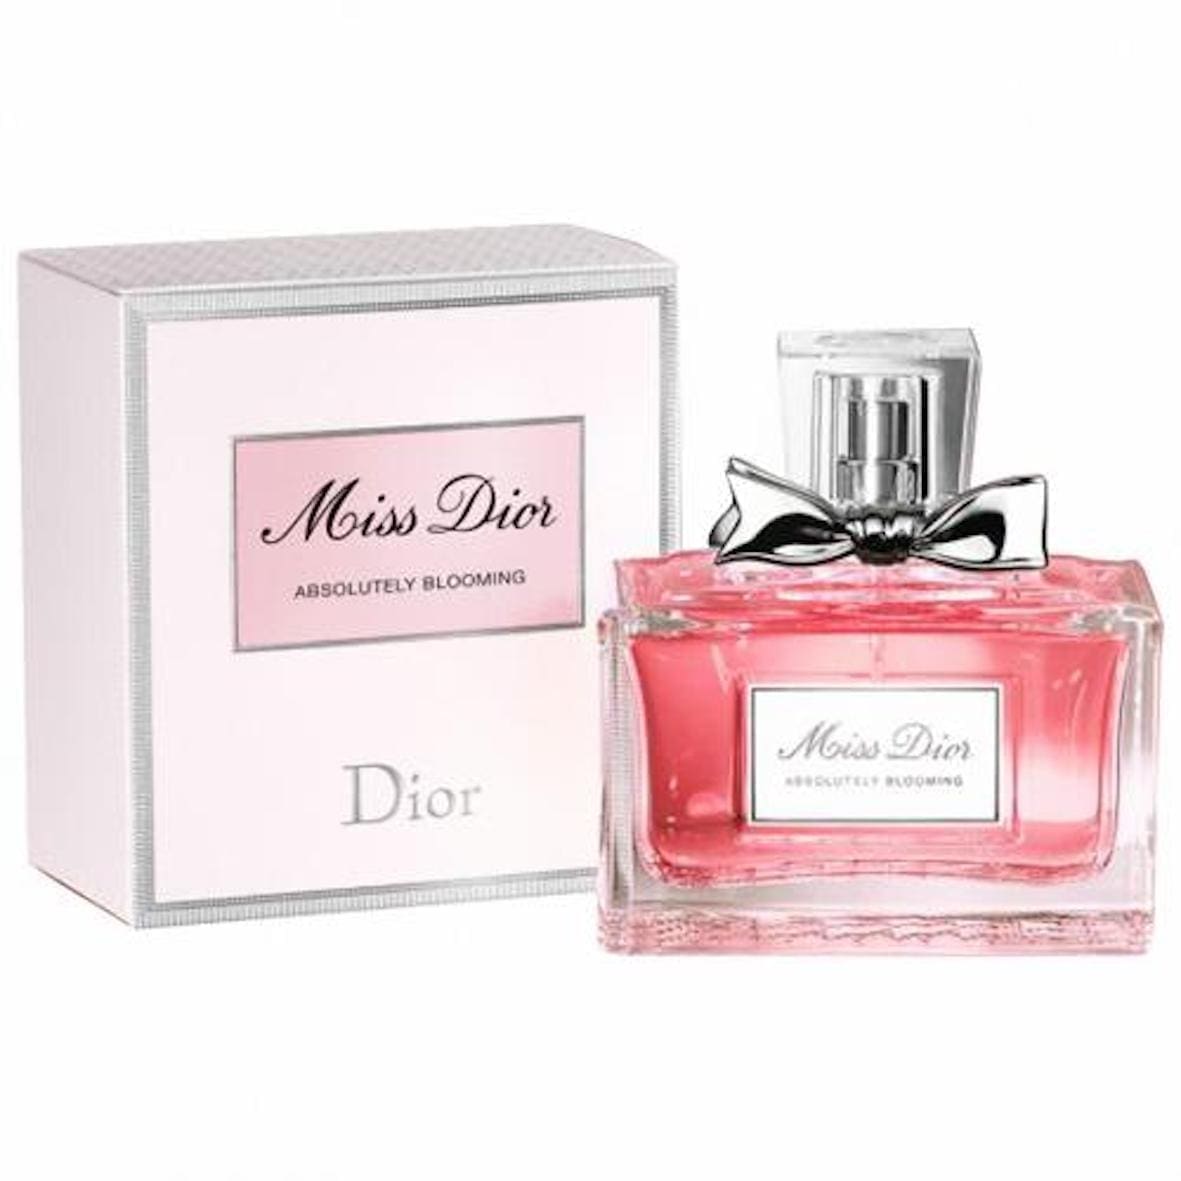 3175 Miss Dior Absolutely Blooming Dior edp 100 ml